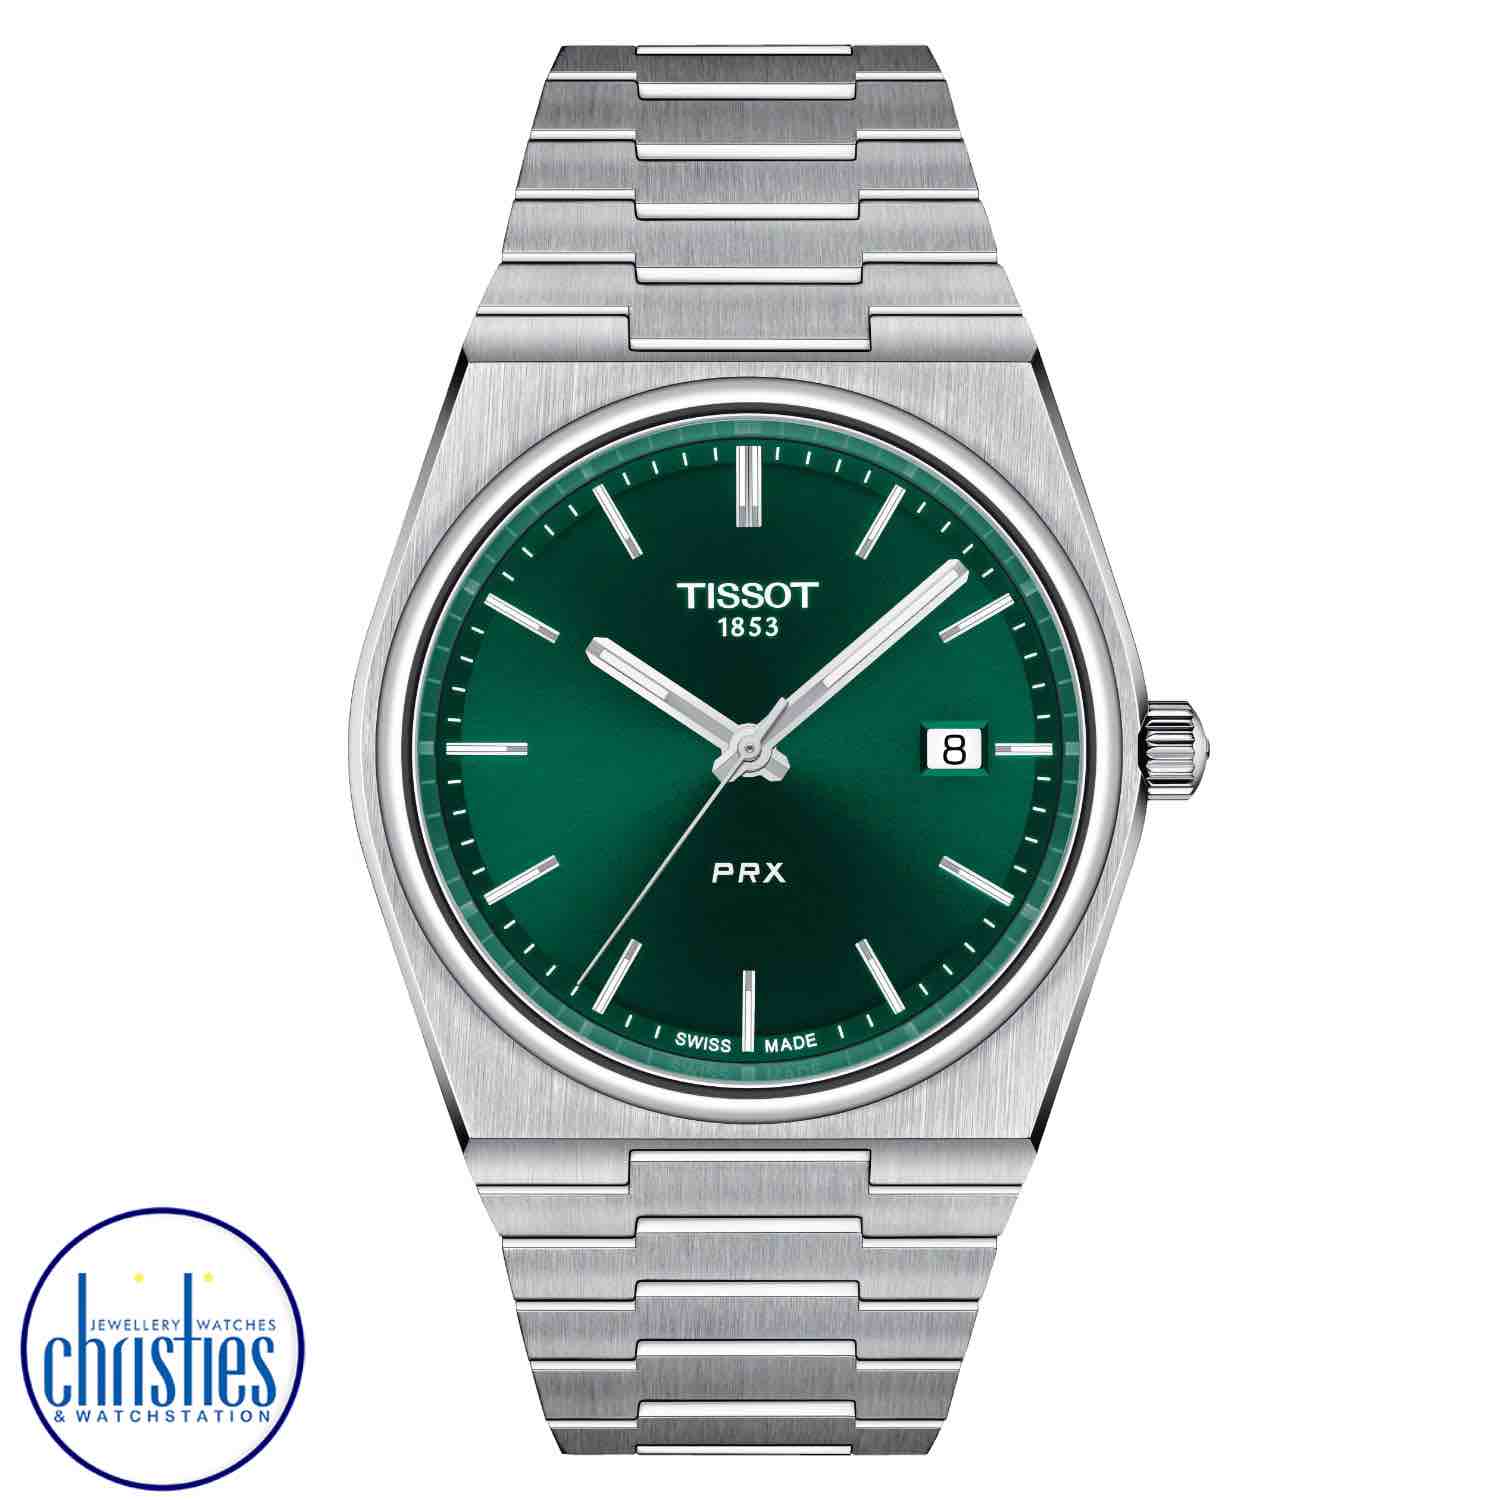 Tissot PRX Green Dial Watch T1374101109100 T137.410.11.091.00 Tissot Watches NZ | Order now for Fast Free Delivery and 7 Day NZ support online and Instore at our Auckland Stores.